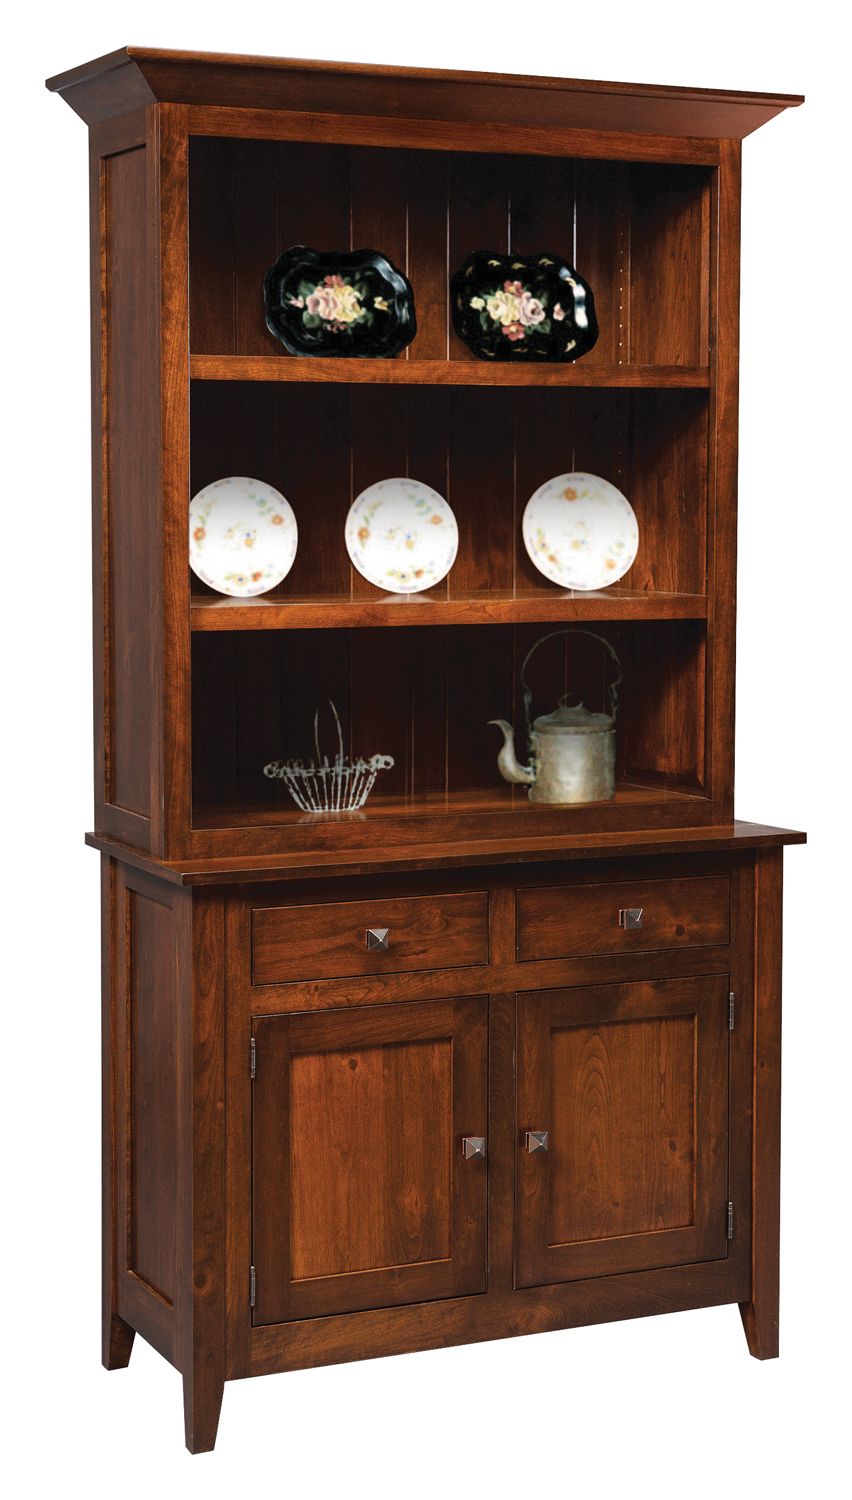 Mlw  452  settlers hutch cp